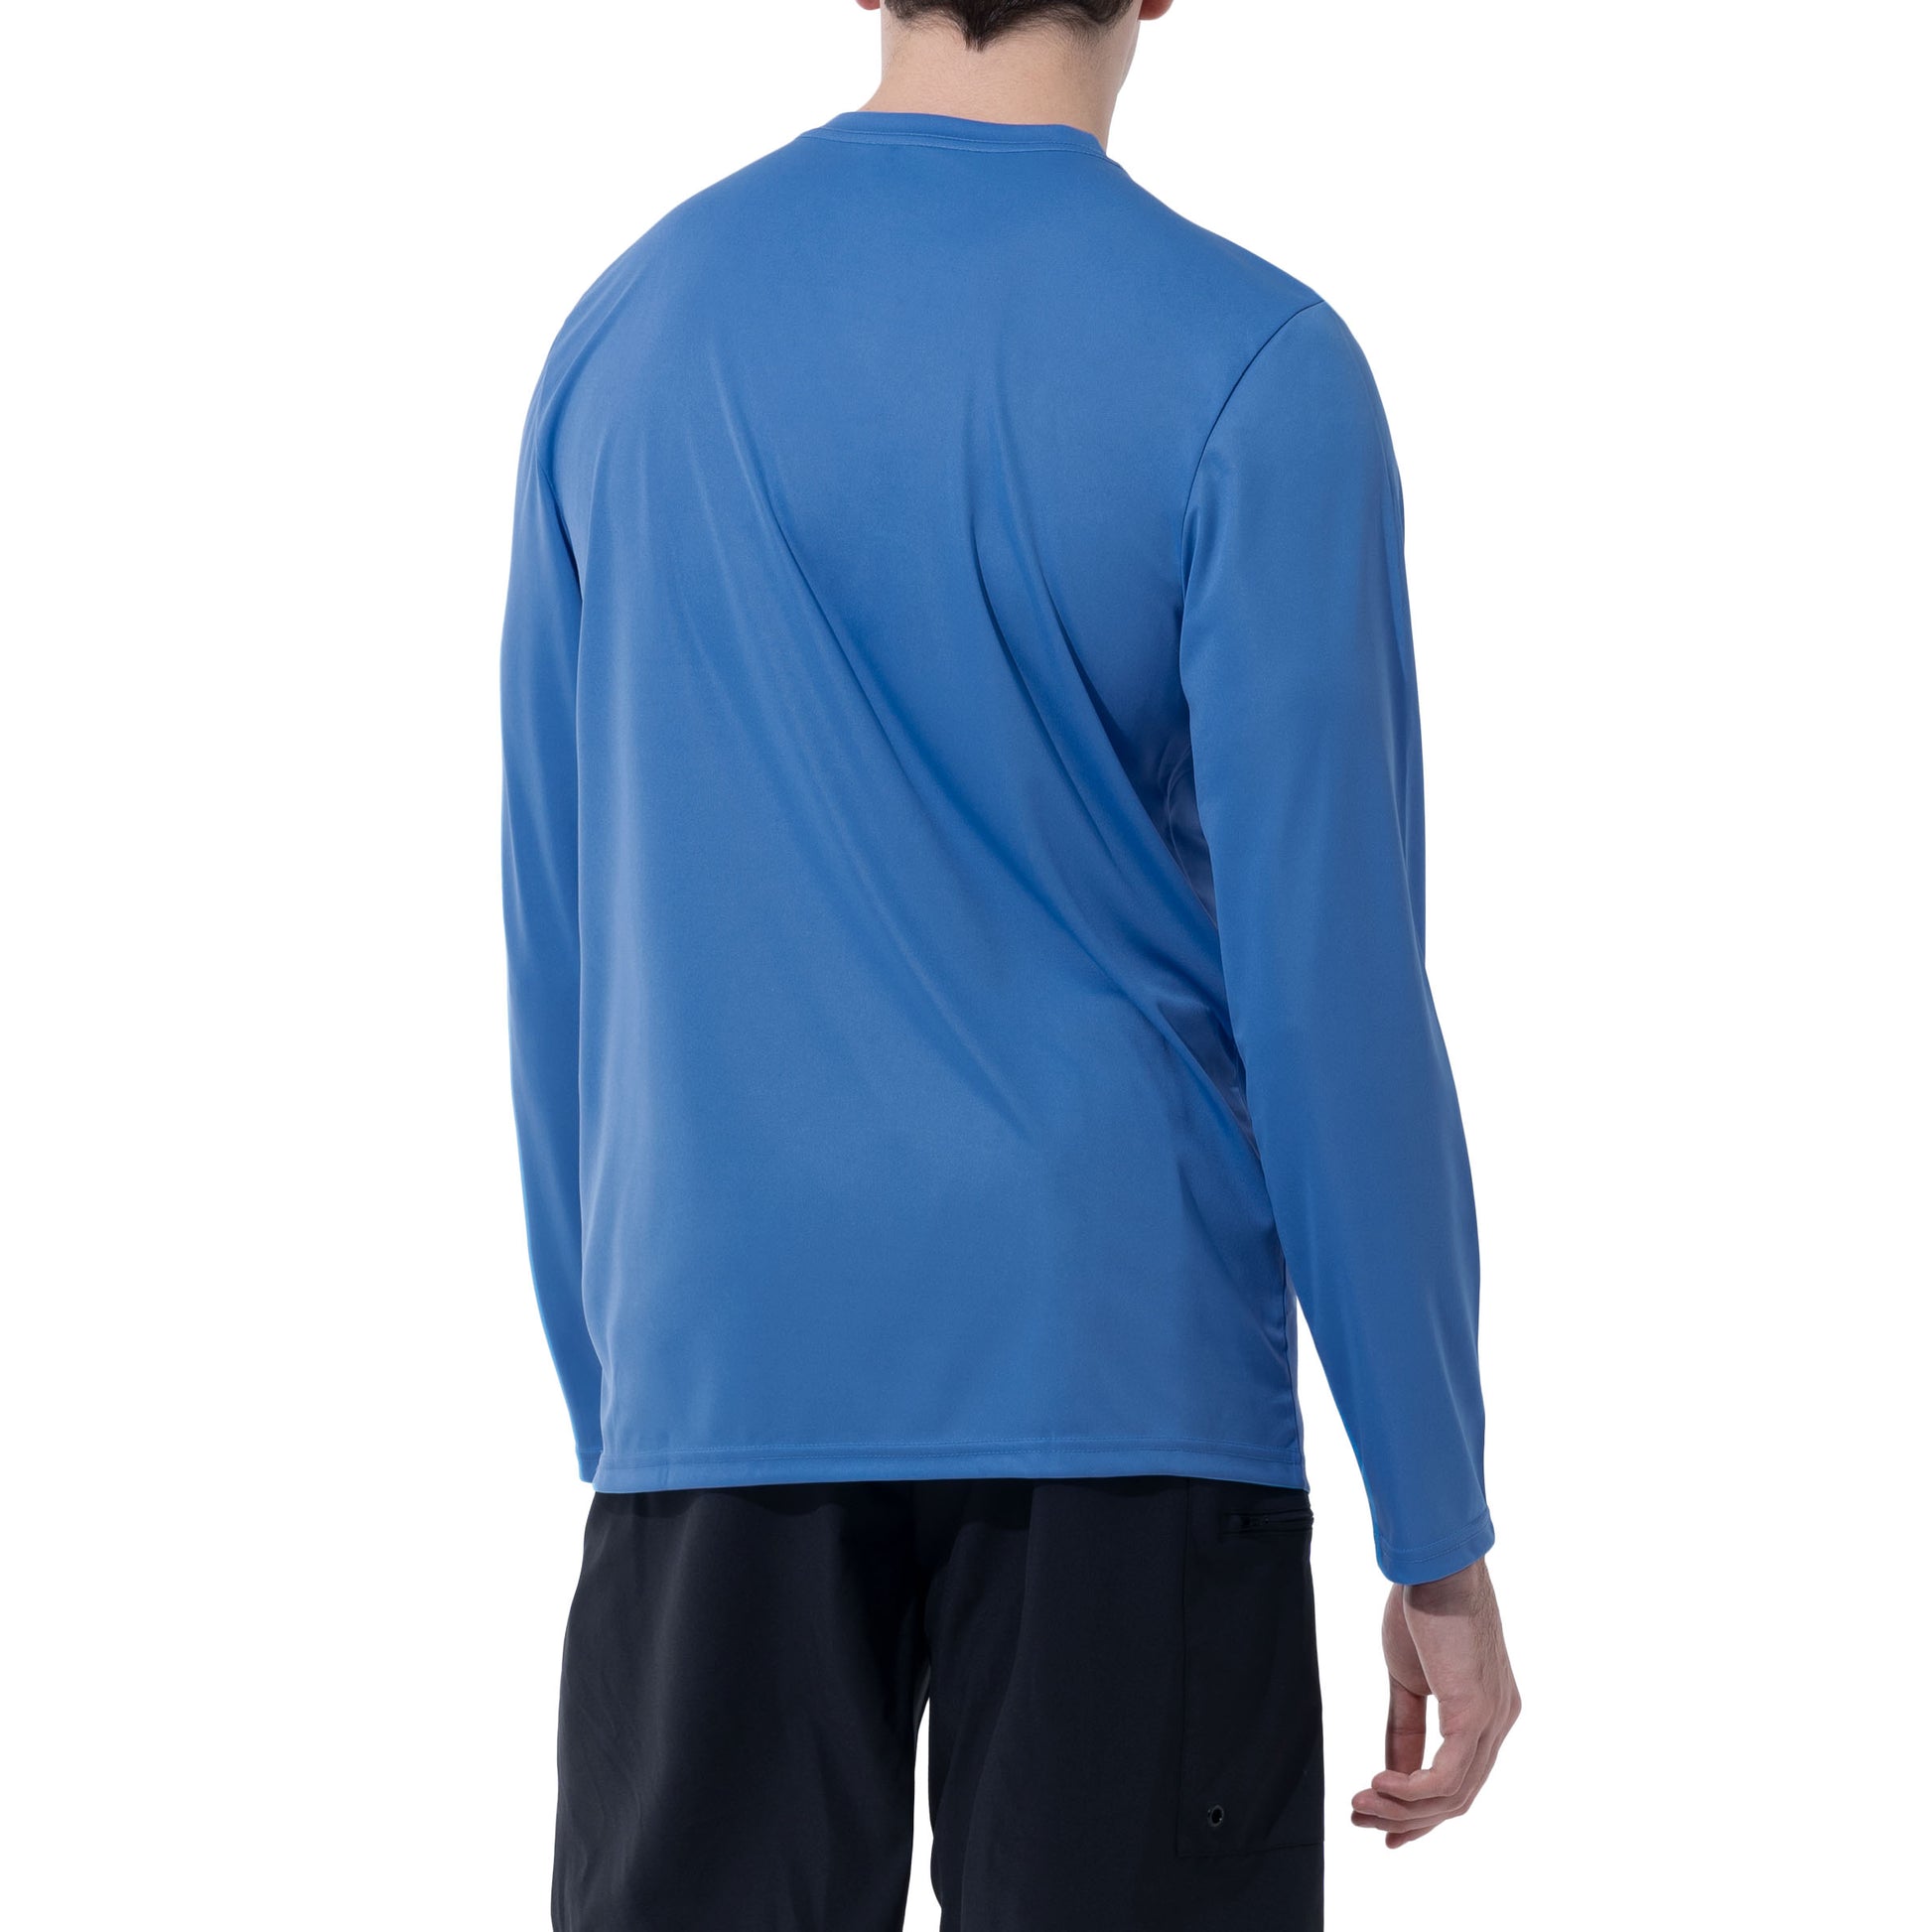 Buy Be Up Moisture Wicking, UV protection, Quick Drying Sports